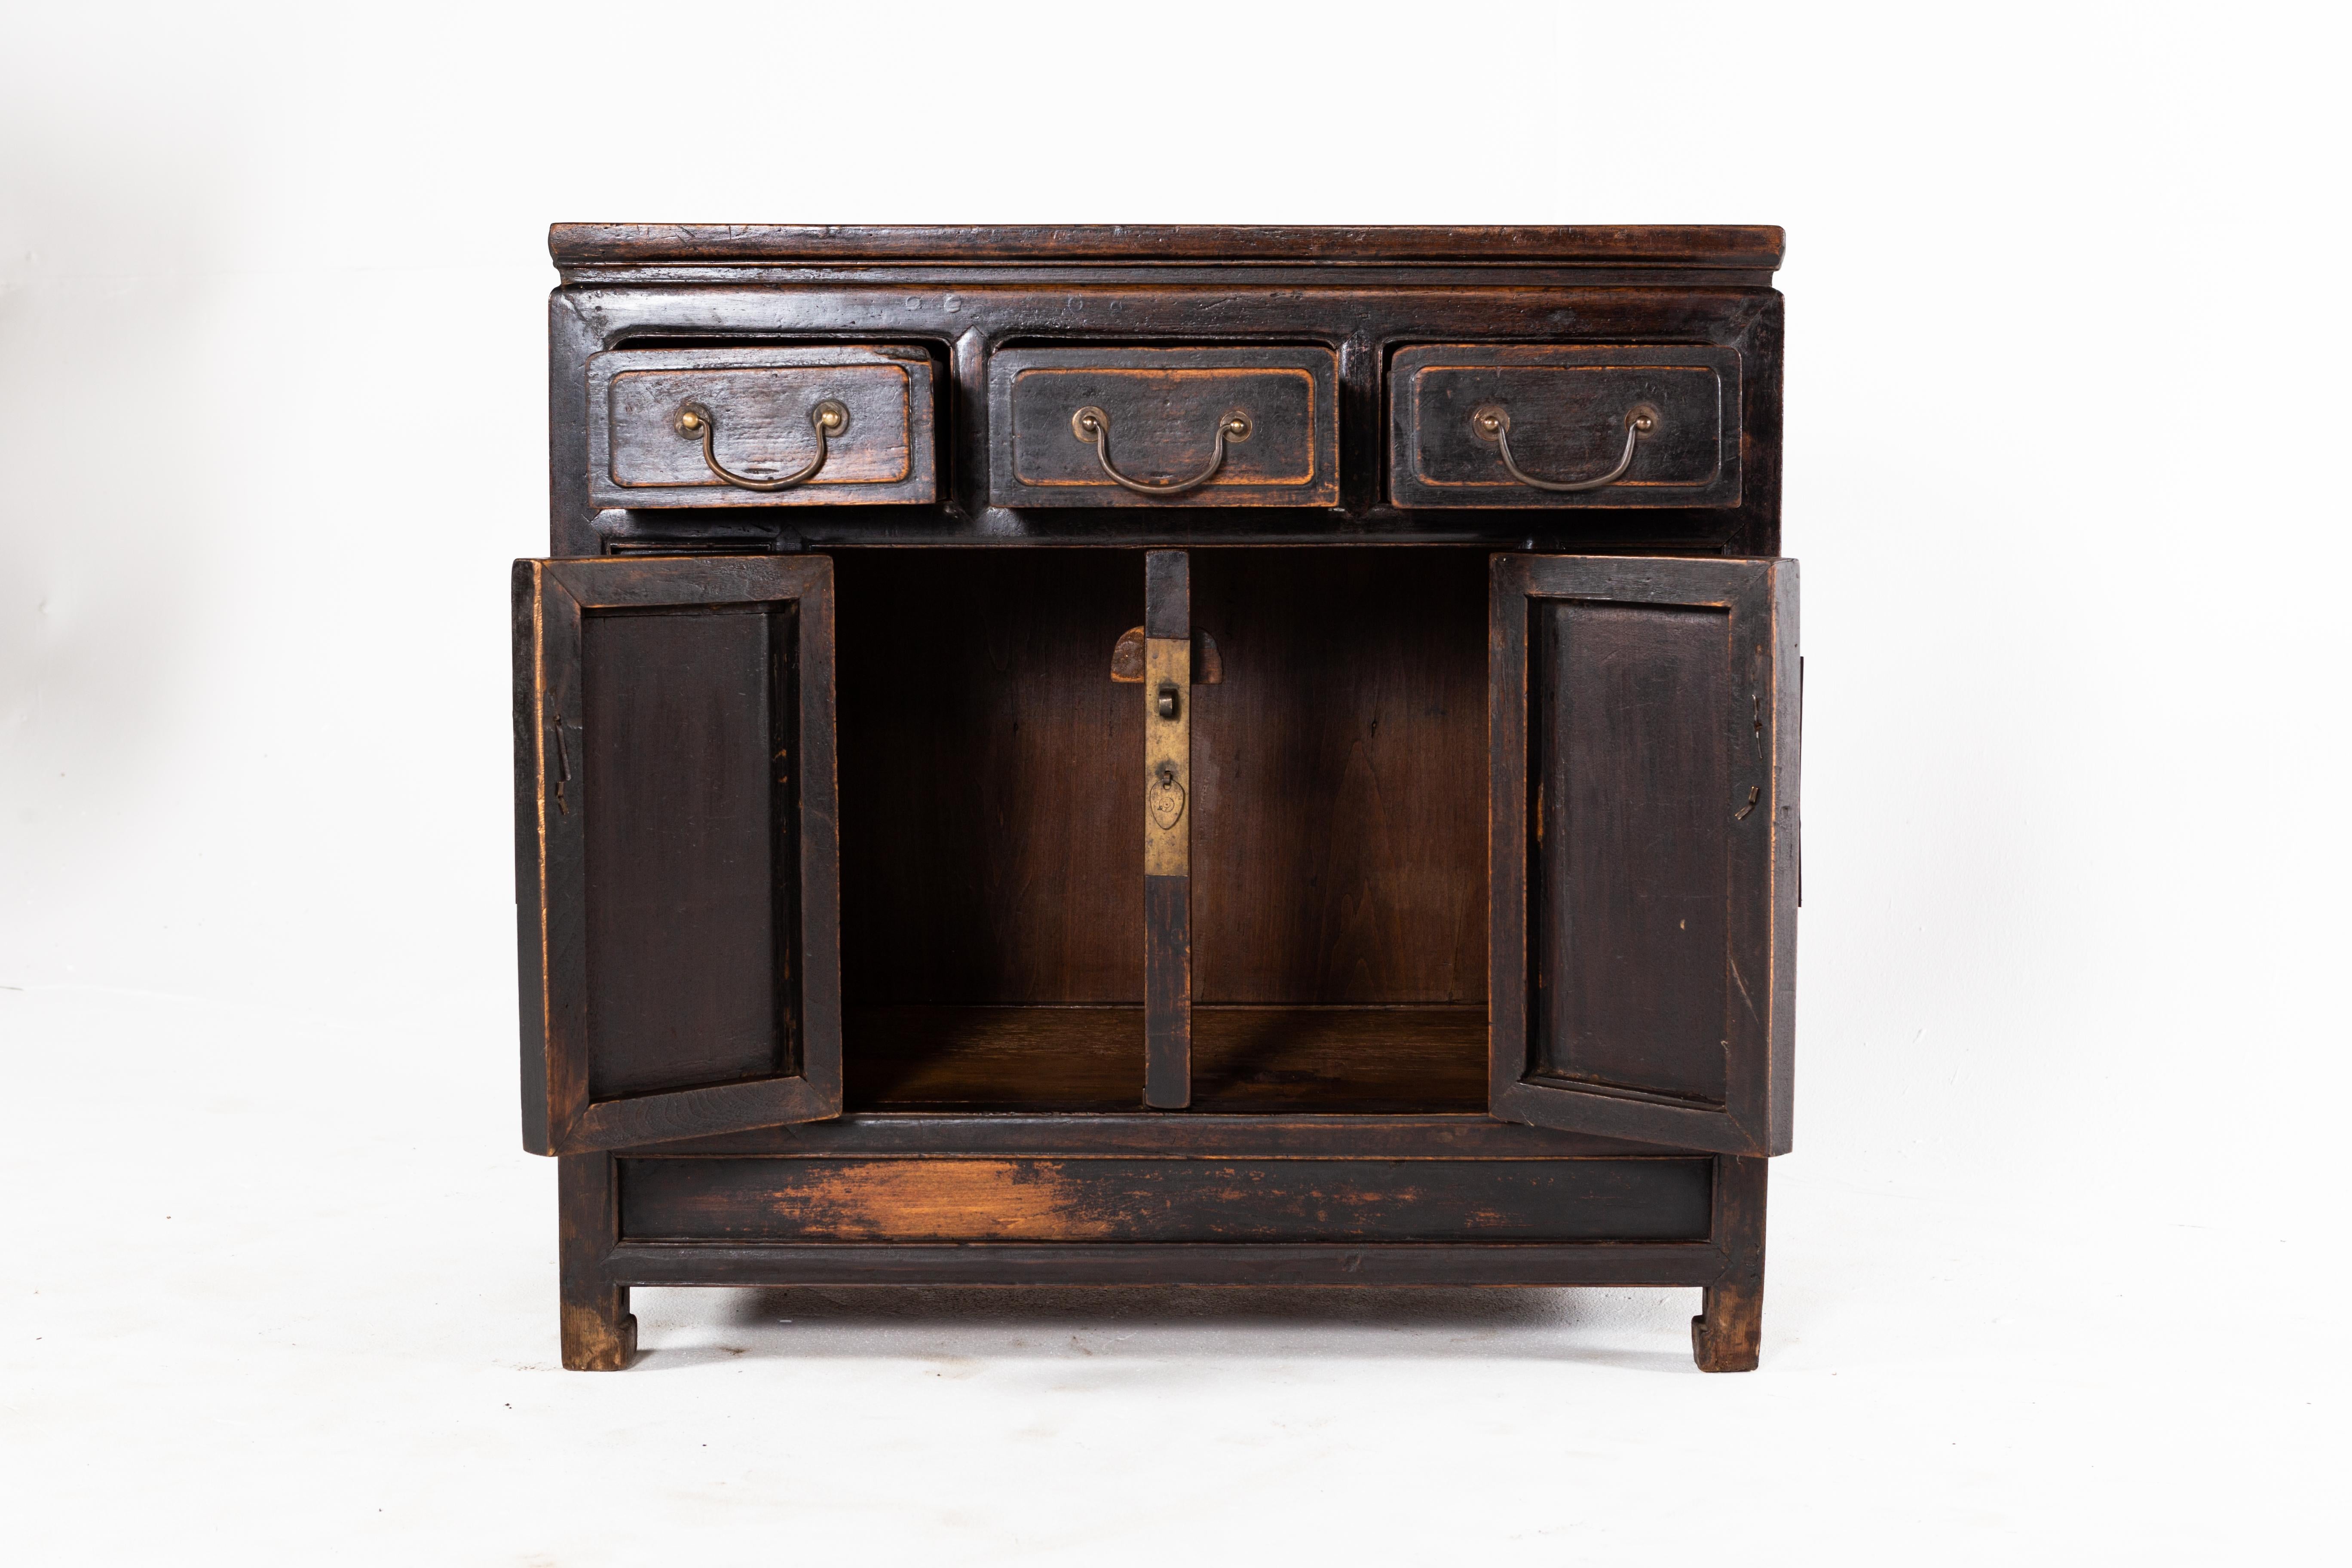 19th Century Qing Dynasty Cabinet with Three Drawers and a Pair of Doors